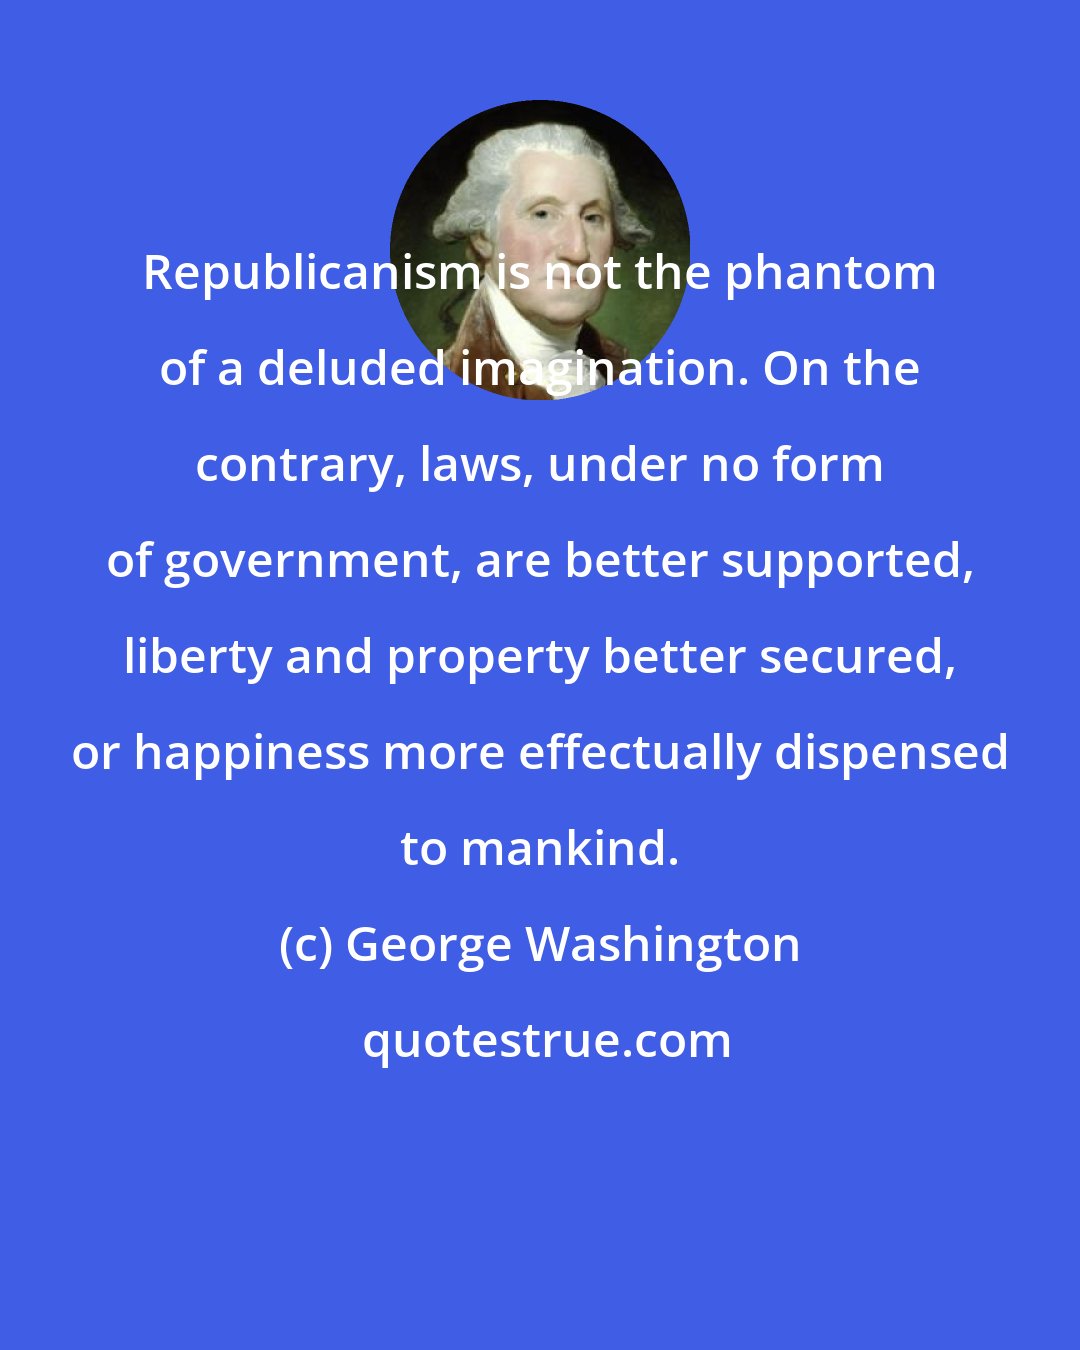 George Washington: Republicanism is not the phantom of a deluded imagination. On the contrary, laws, under no form of government, are better supported, liberty and property better secured, or happiness more effectually dispensed to mankind.